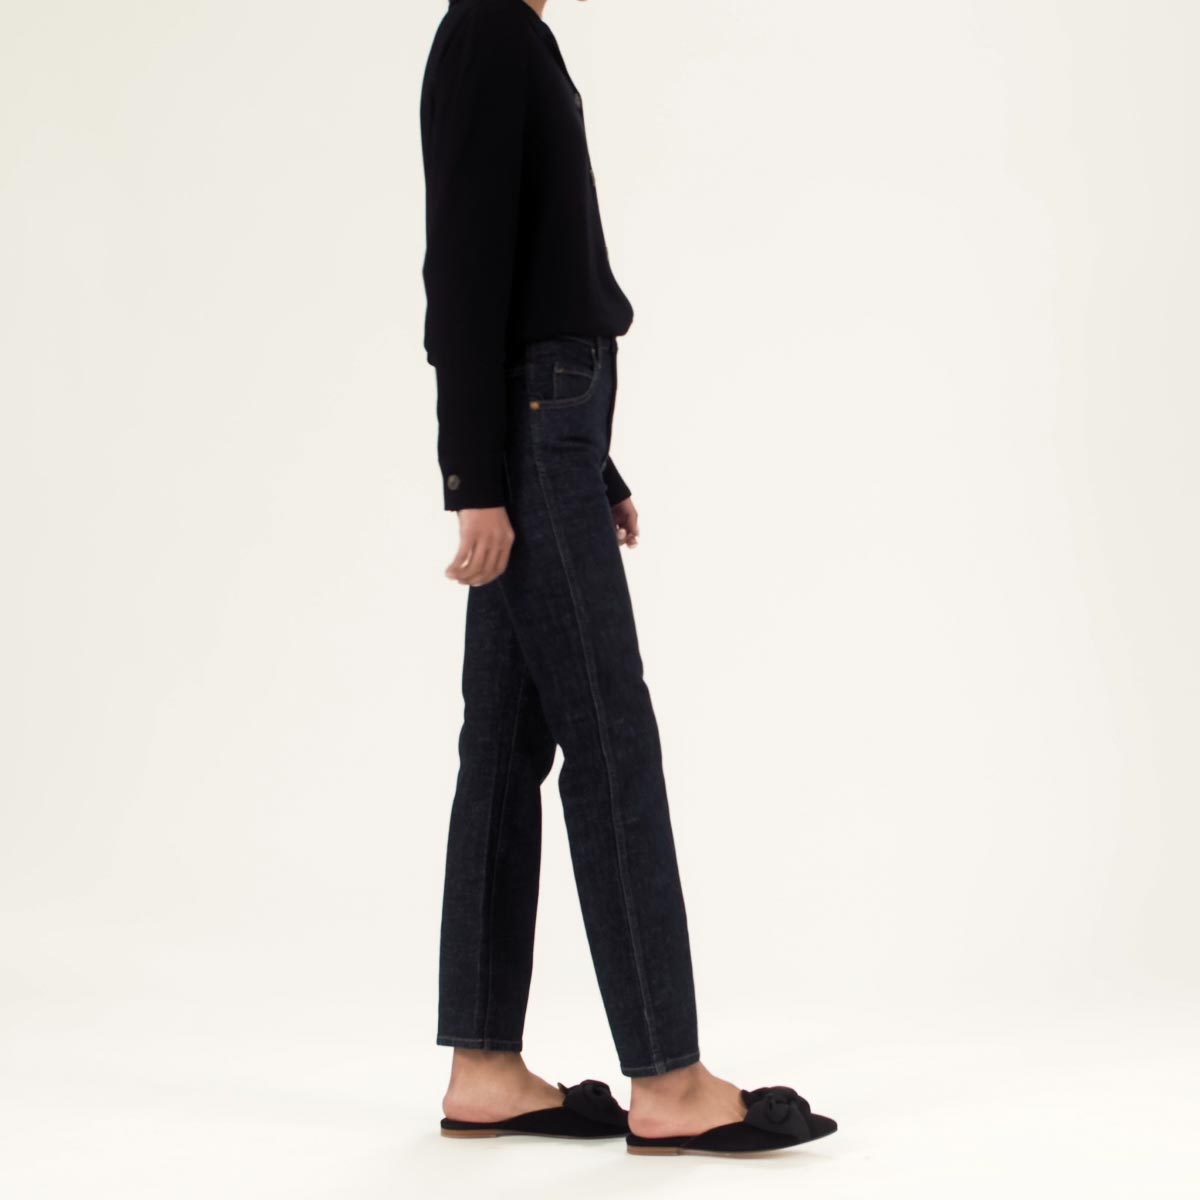 The Mule in Black Suede shown on model styled with black denim and a black knit cardigan.